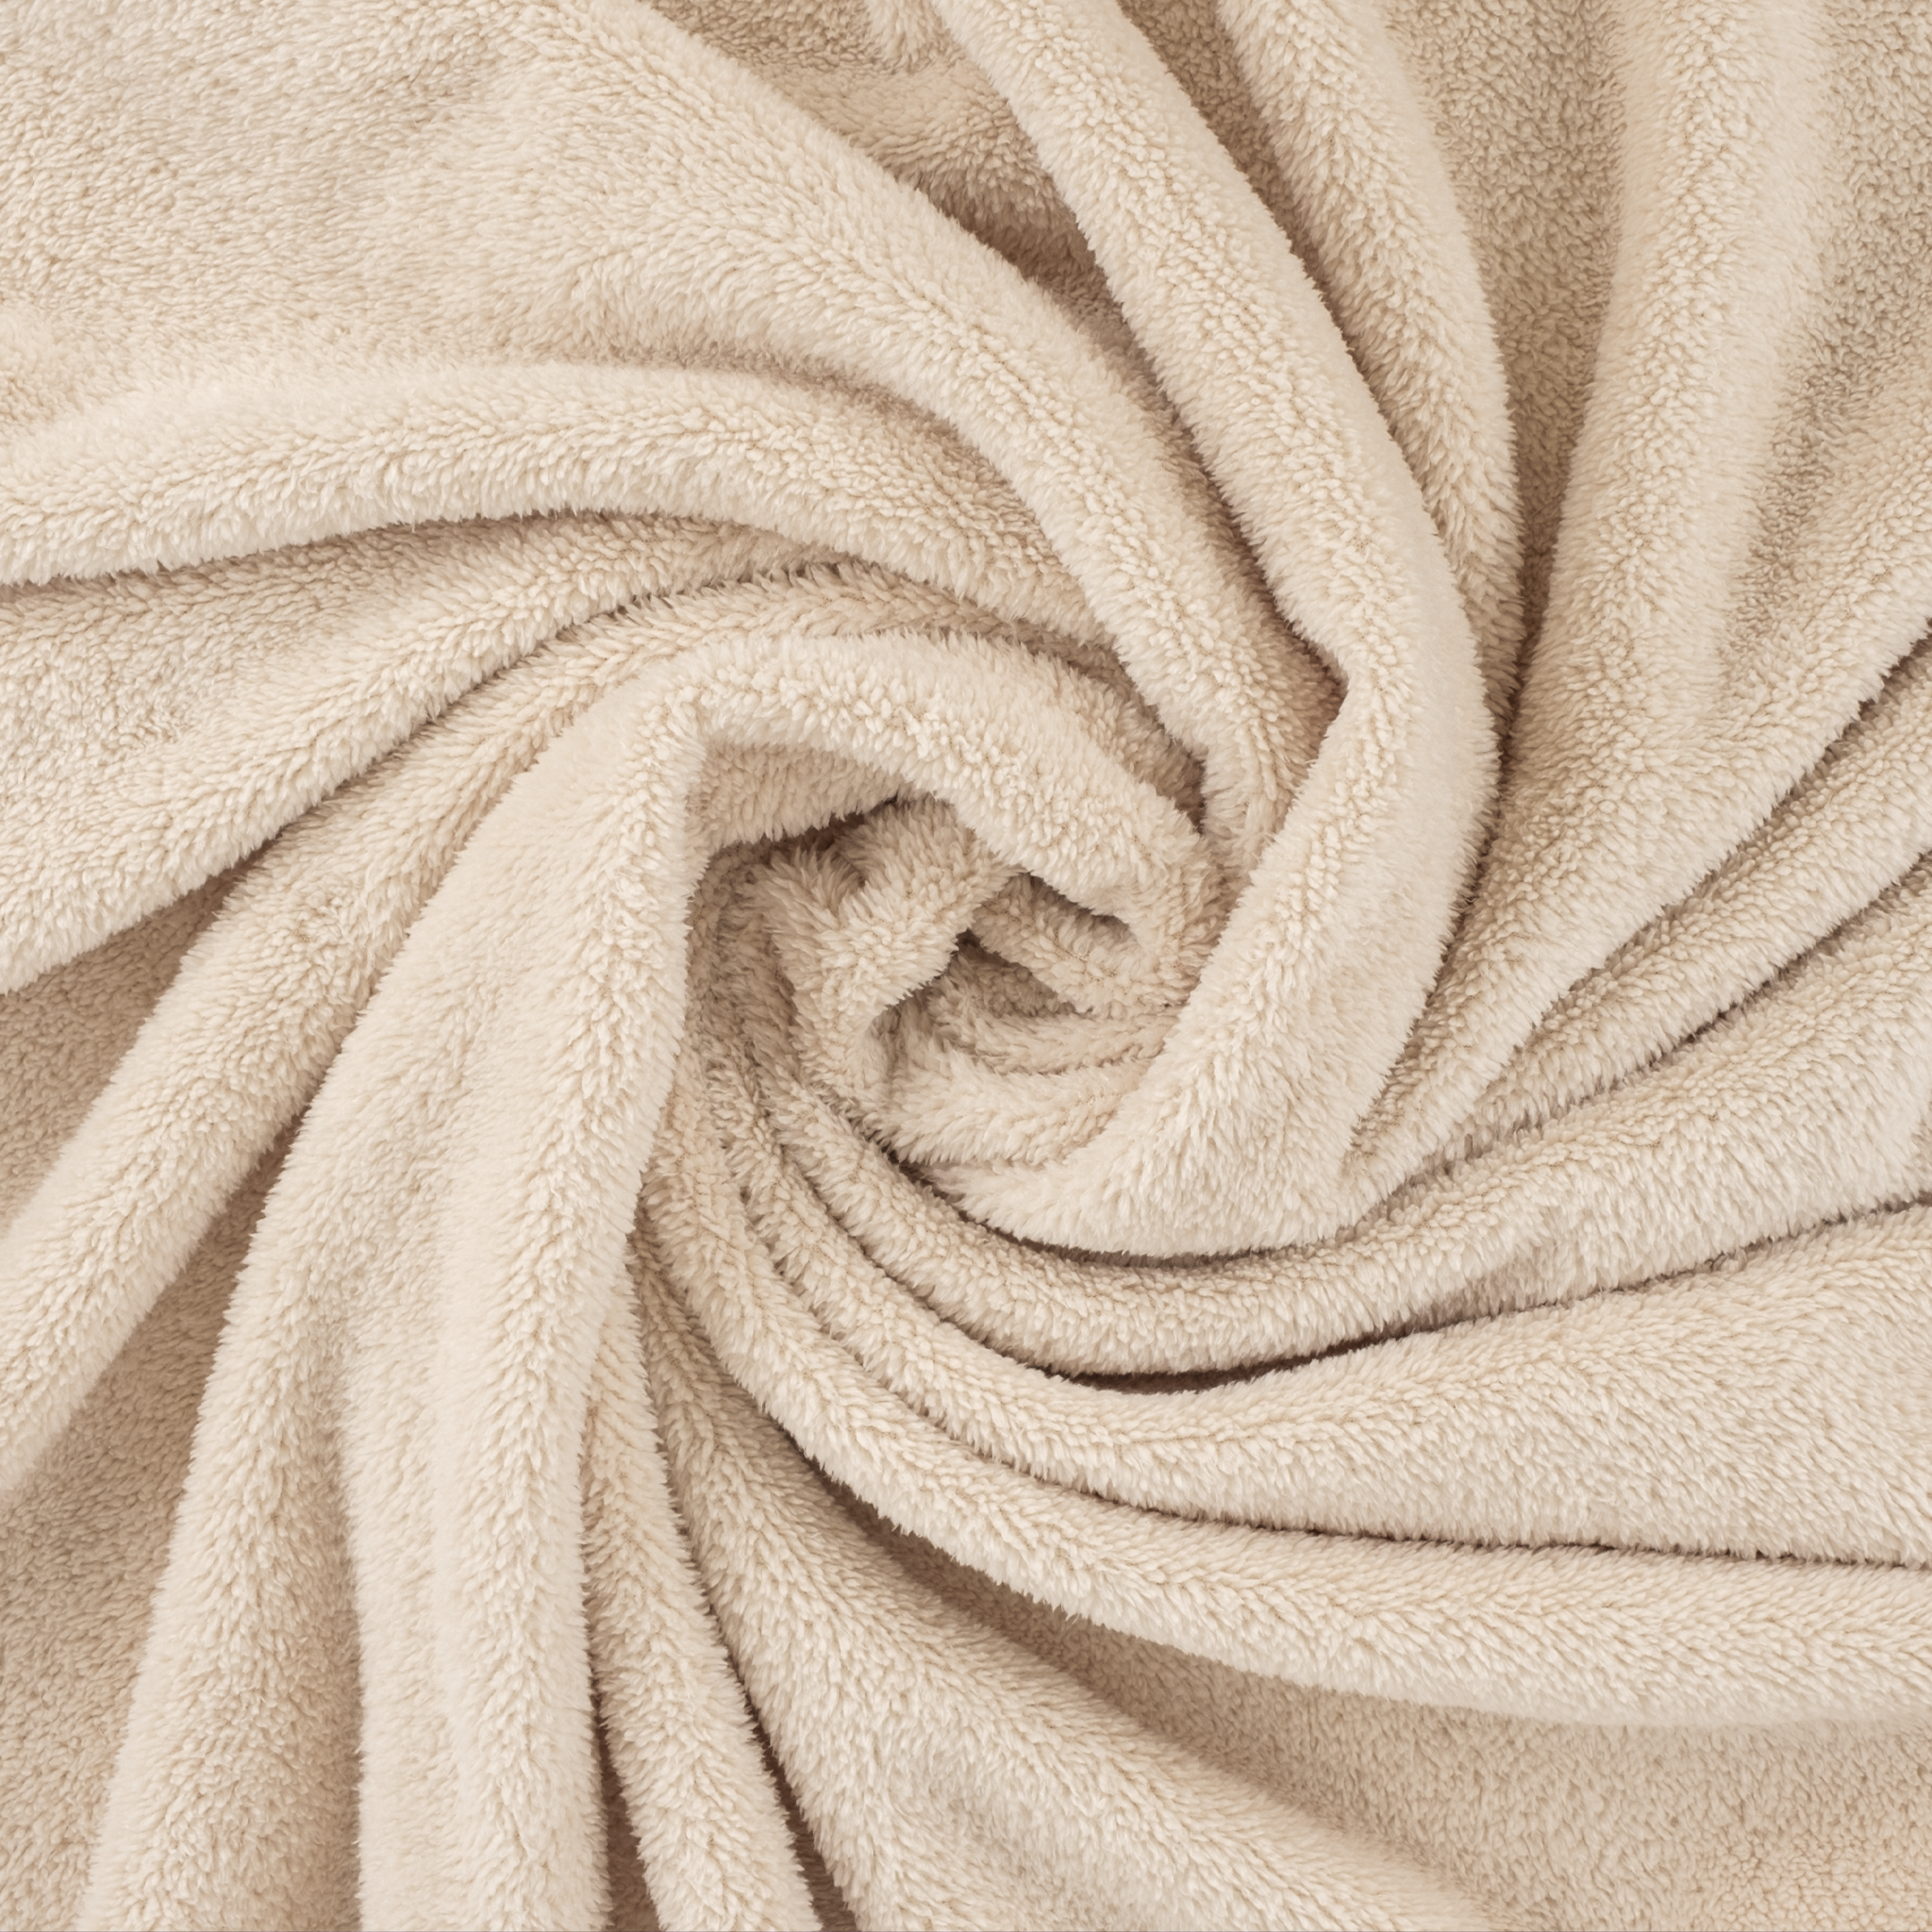 American Soft Linen - Bedding Fleece Blanket - Twin Size 60x80 inches - Sand-Taupe - 5